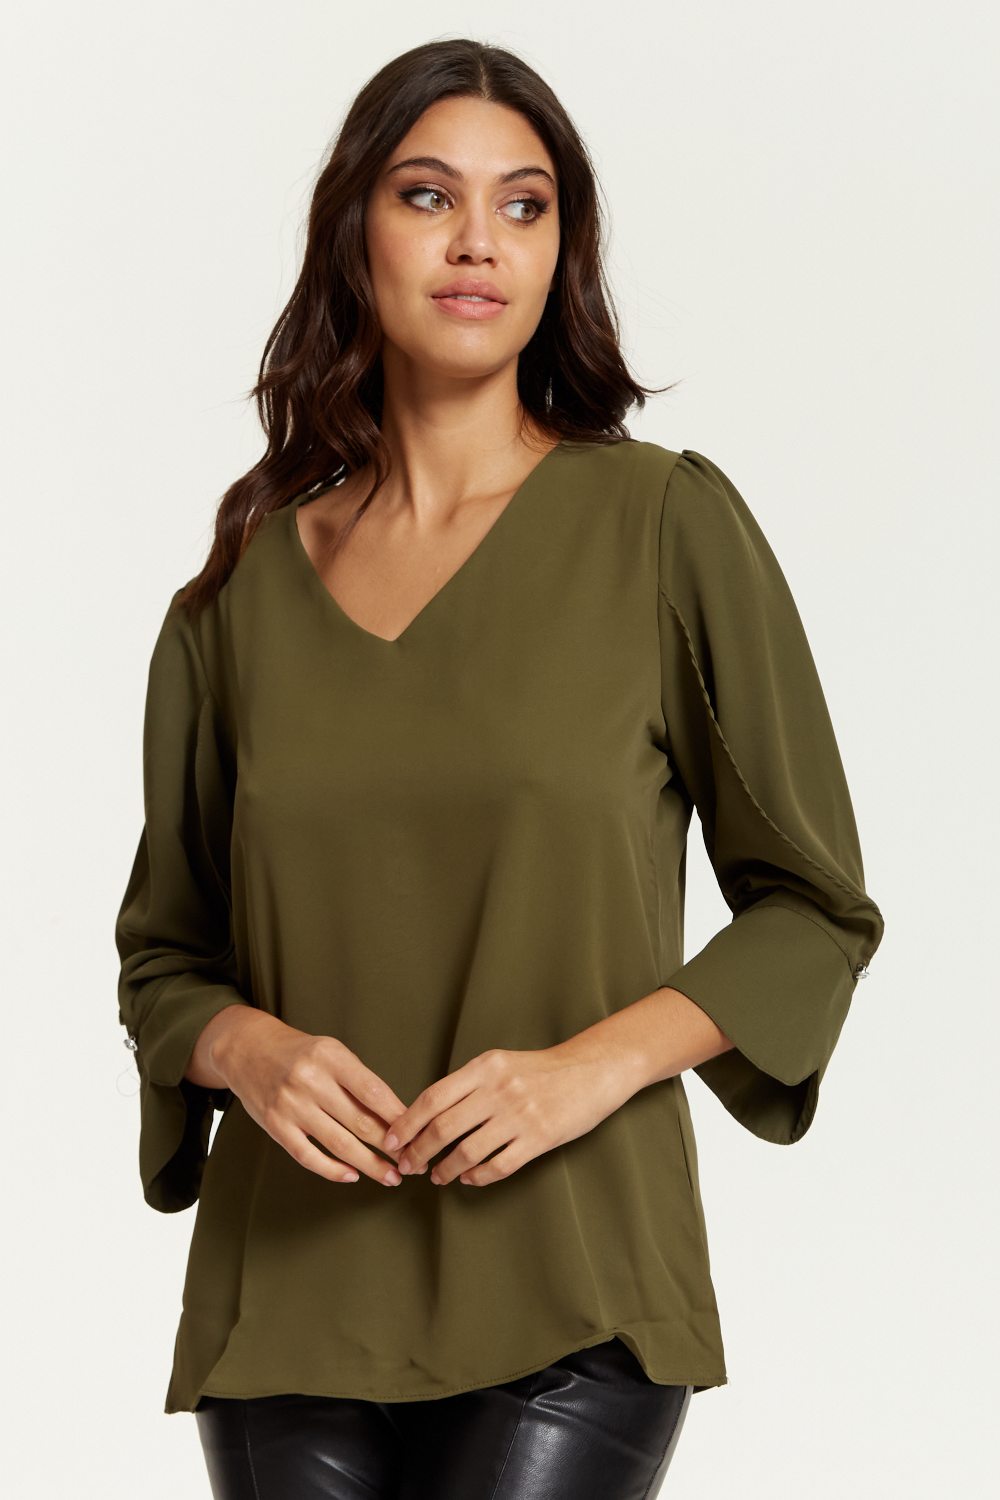 Long Sleeves Detailed Cuff Blouse with V Neck in Khaki GLR FASHION NETWORKING